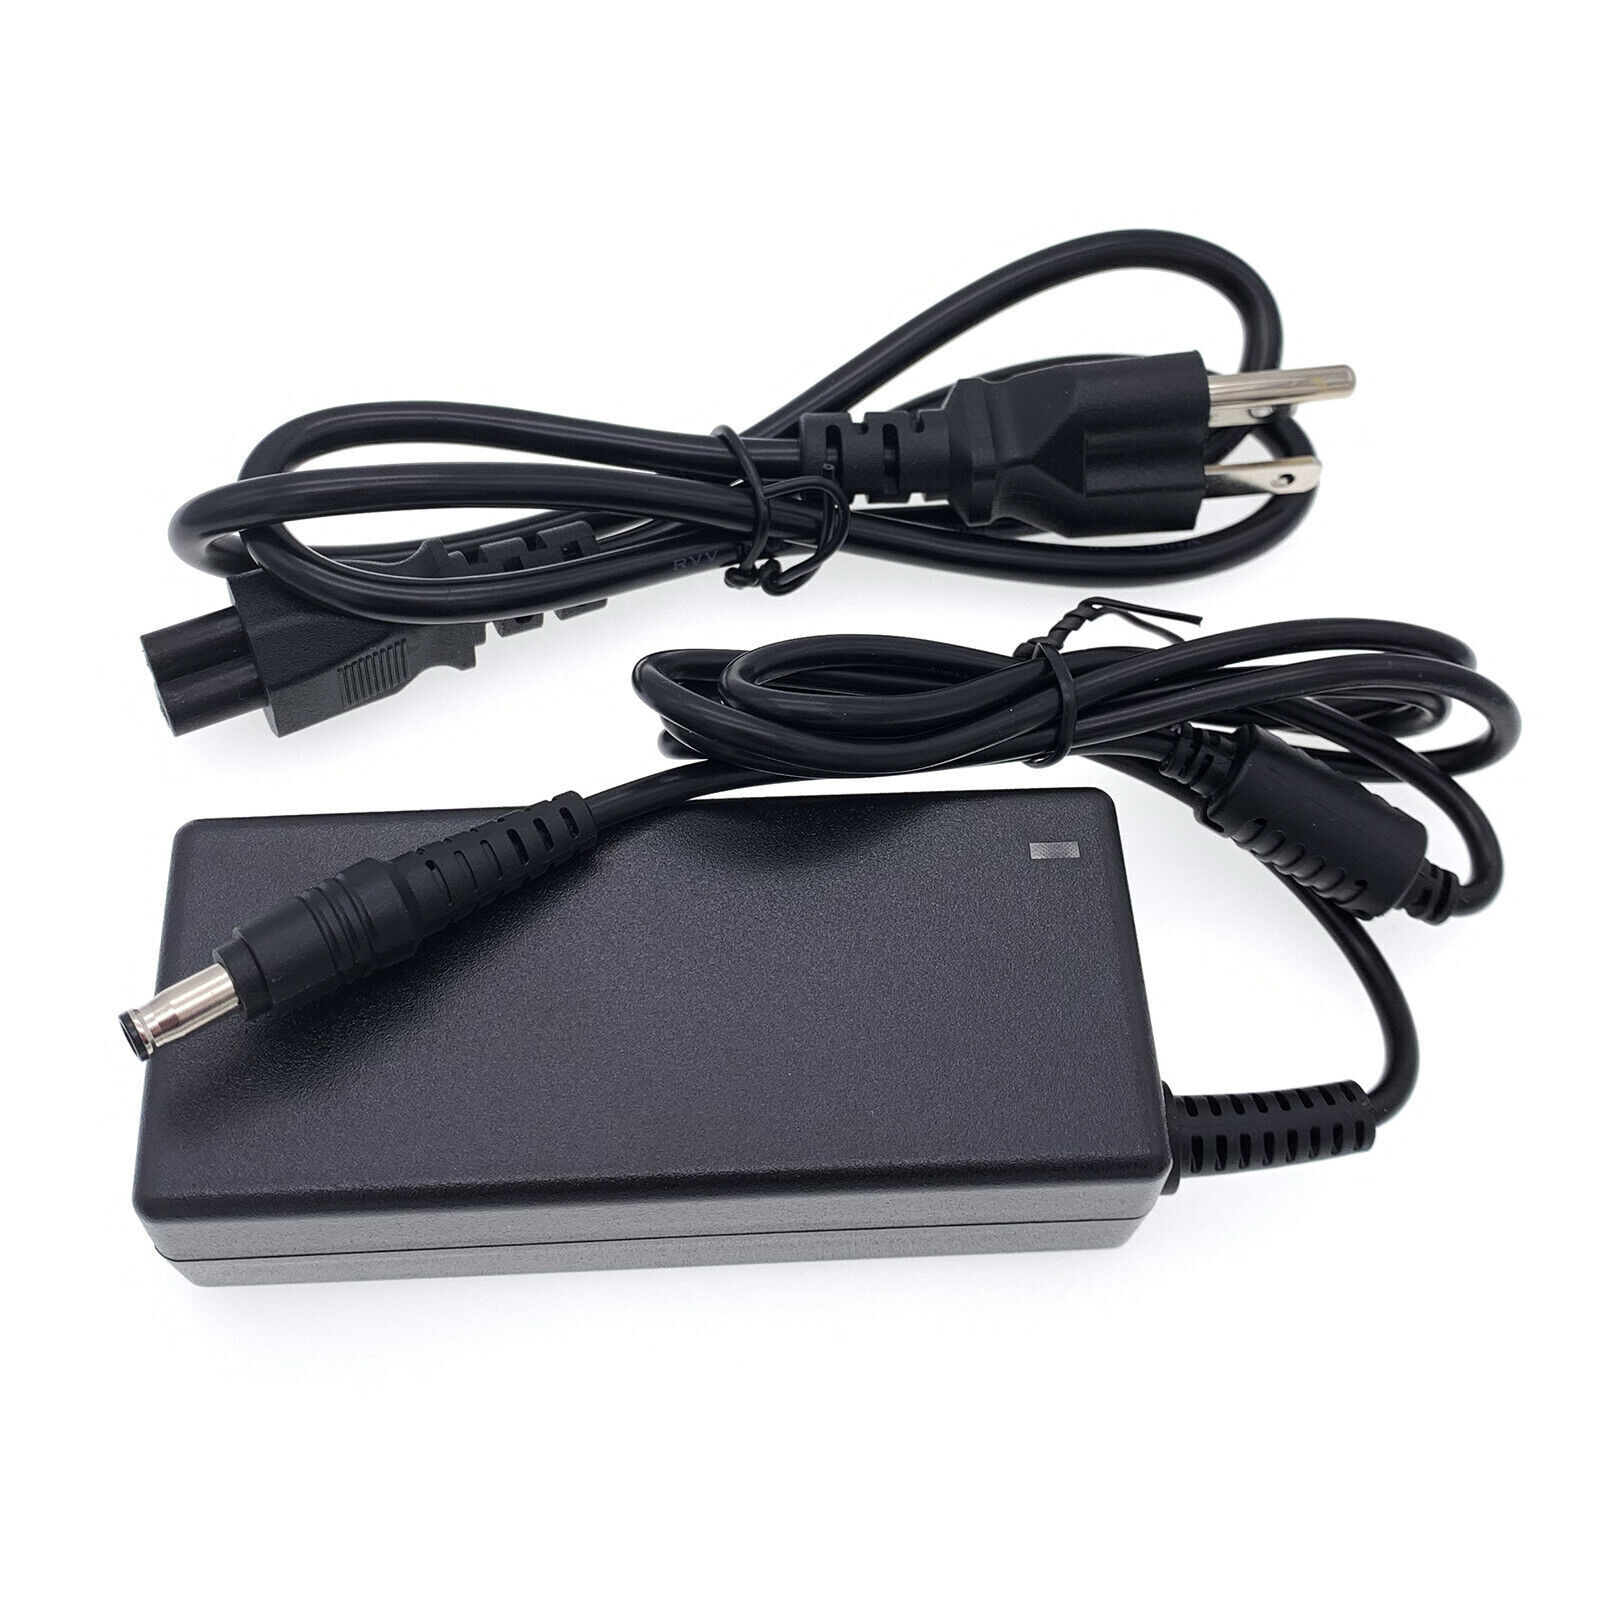 60W AC Adapter Charger Power Supply Cord For SAMSUNG PA-1600-96 AD-6019B 5.5mm